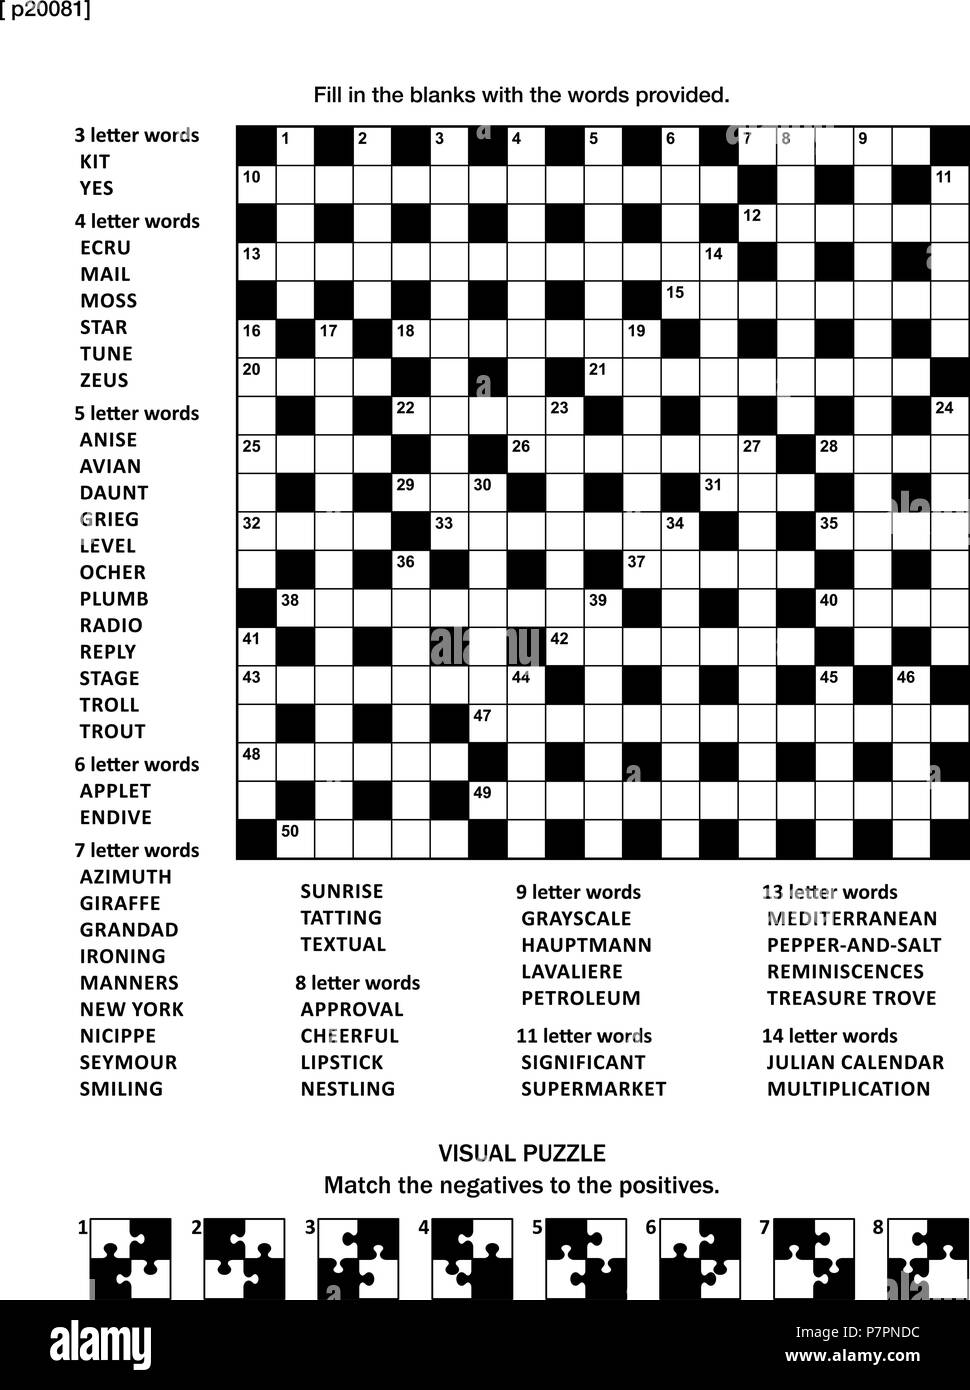 Puzzle Page With Two Puzzles 19x19 Criss cross kriss kross Fill In The Blanks Crossword Word 